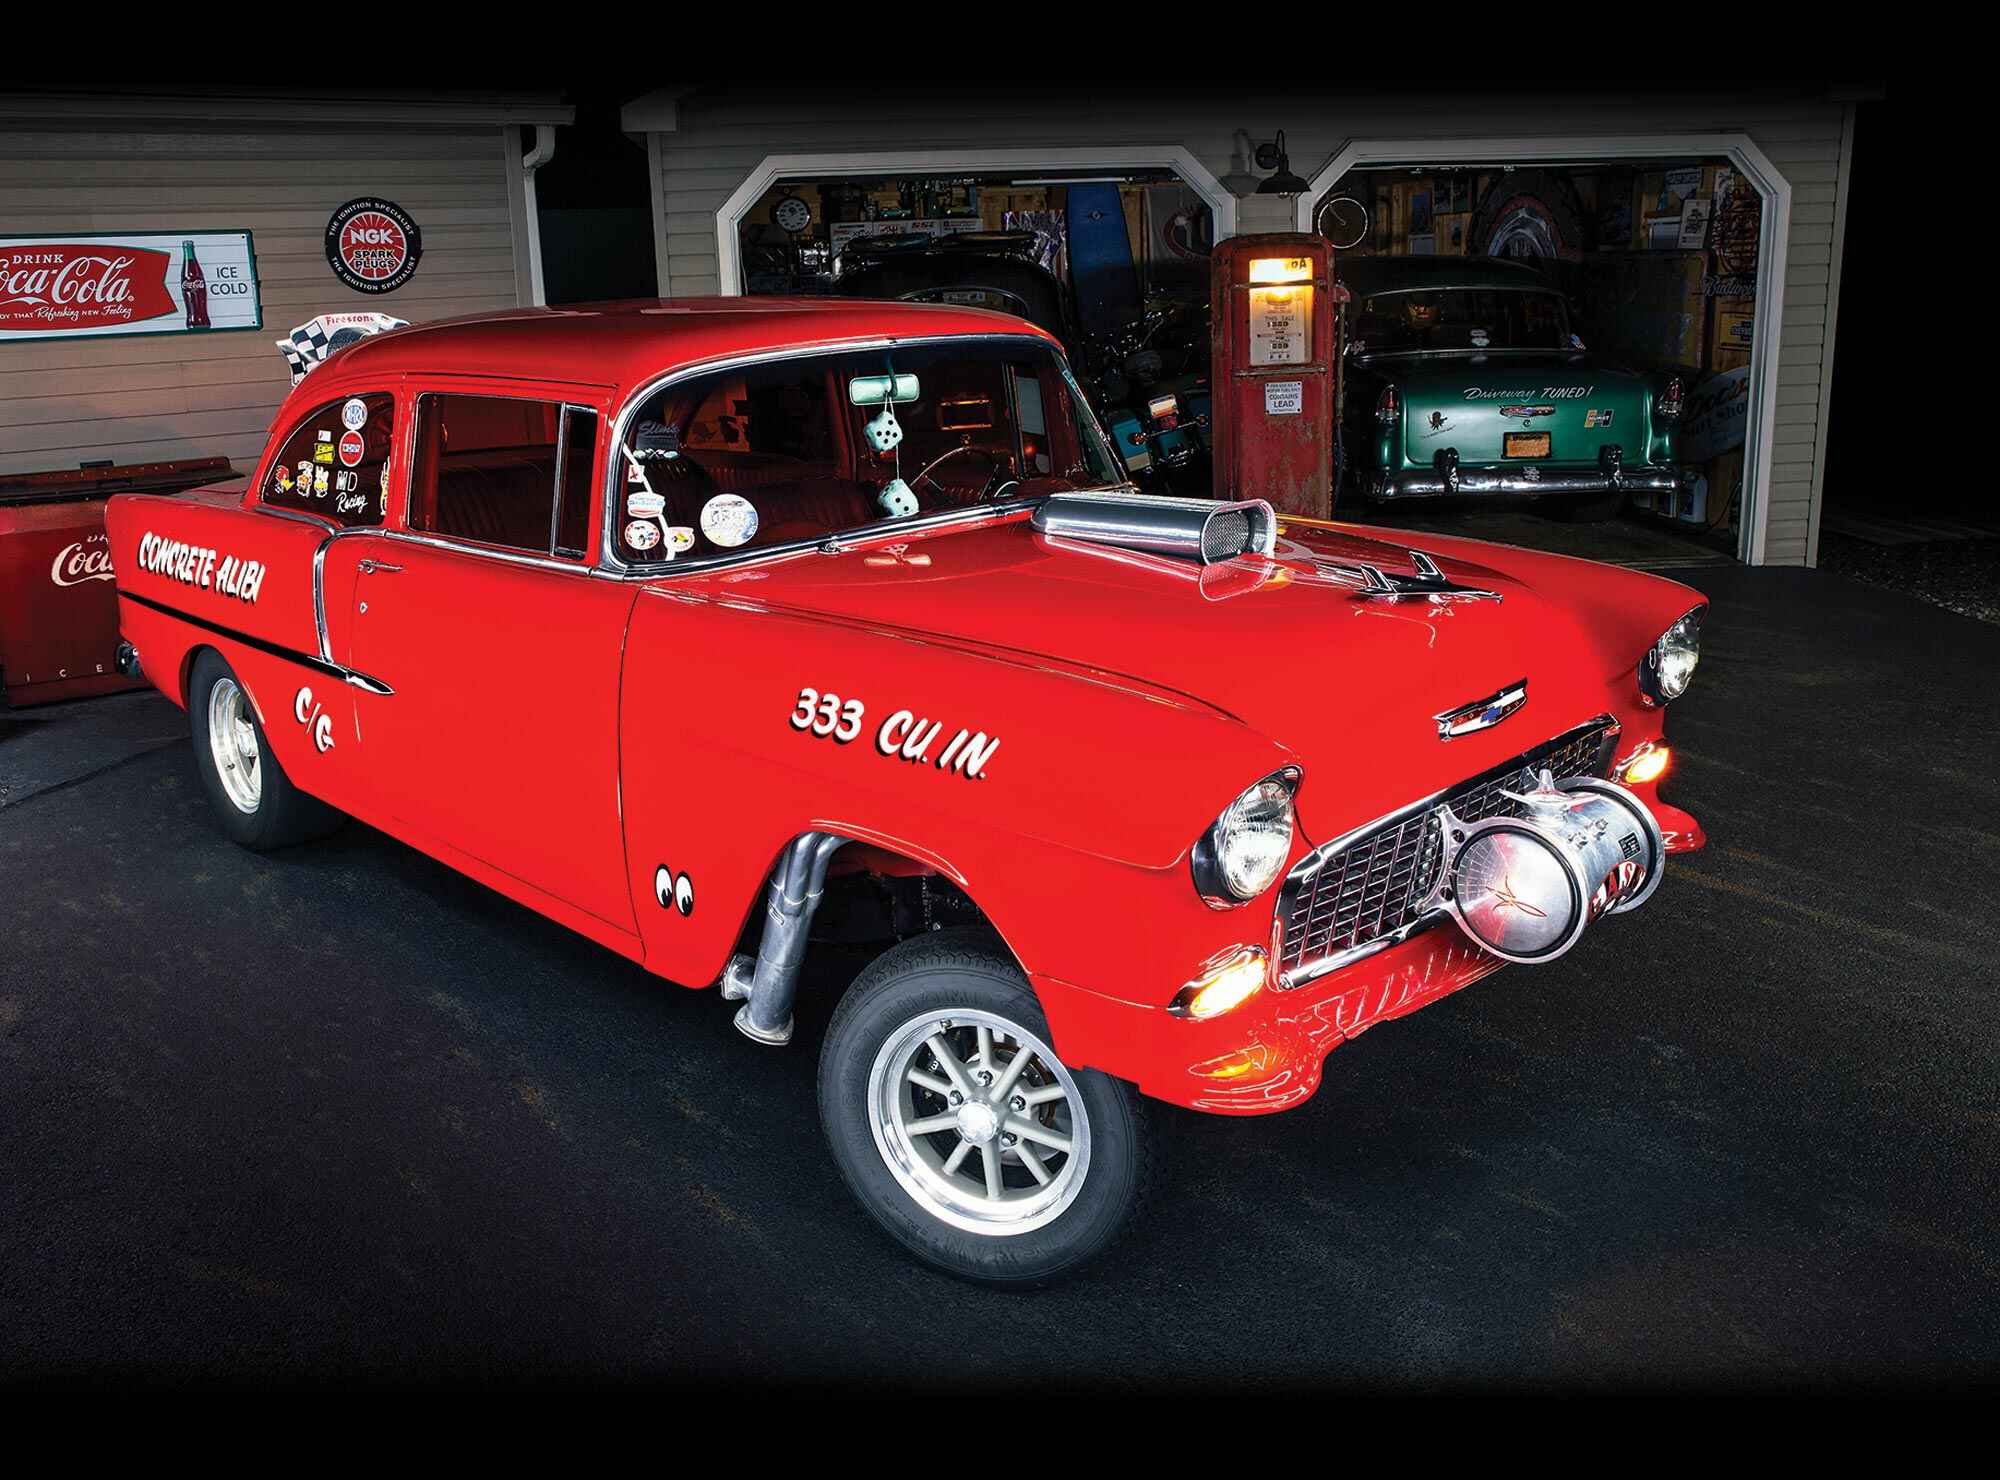 three quarter front view of the '55 Chevy gasser